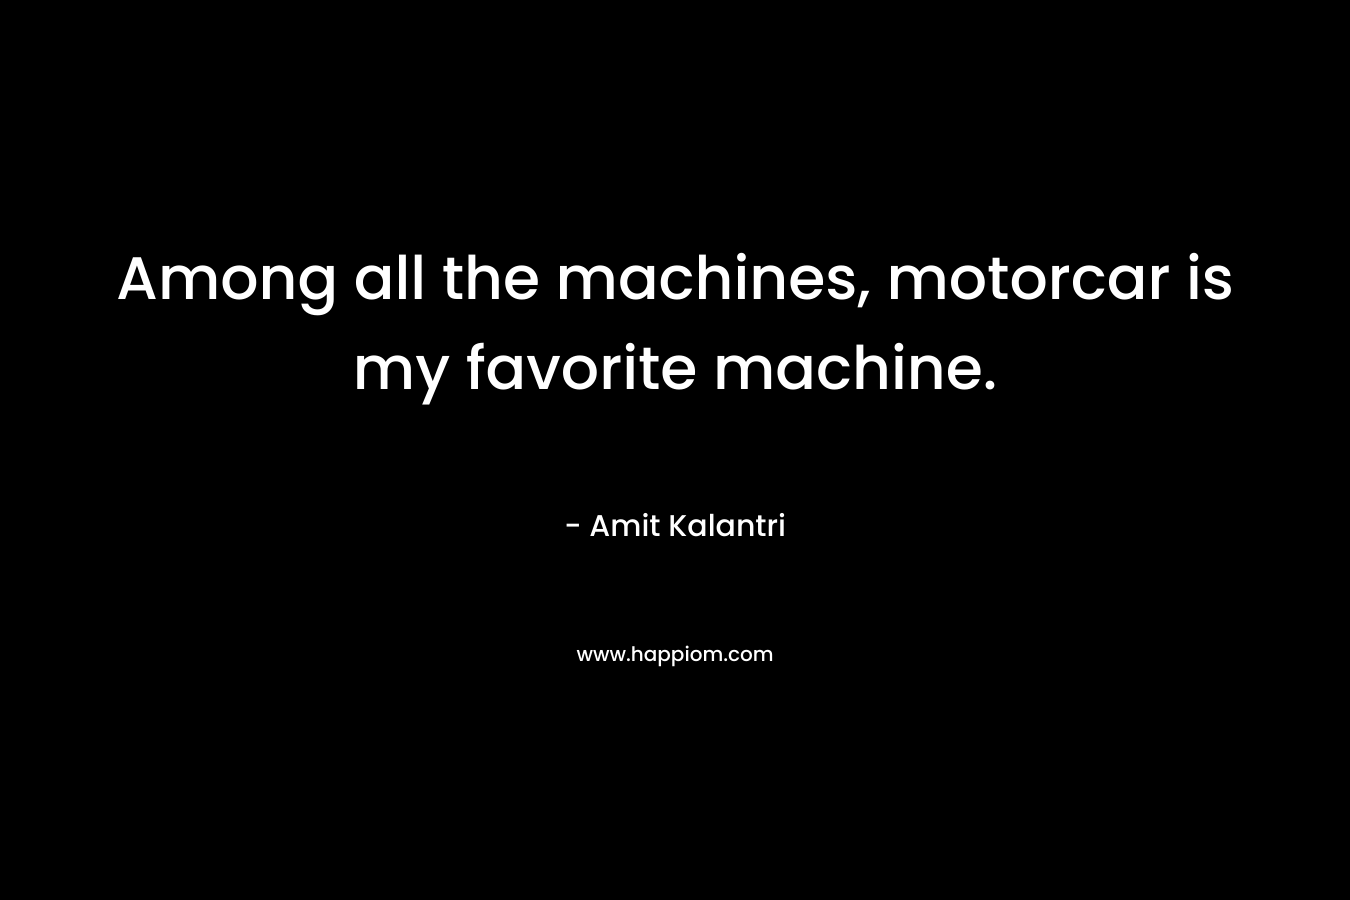 Among all the machines, motorcar is my favorite machine.